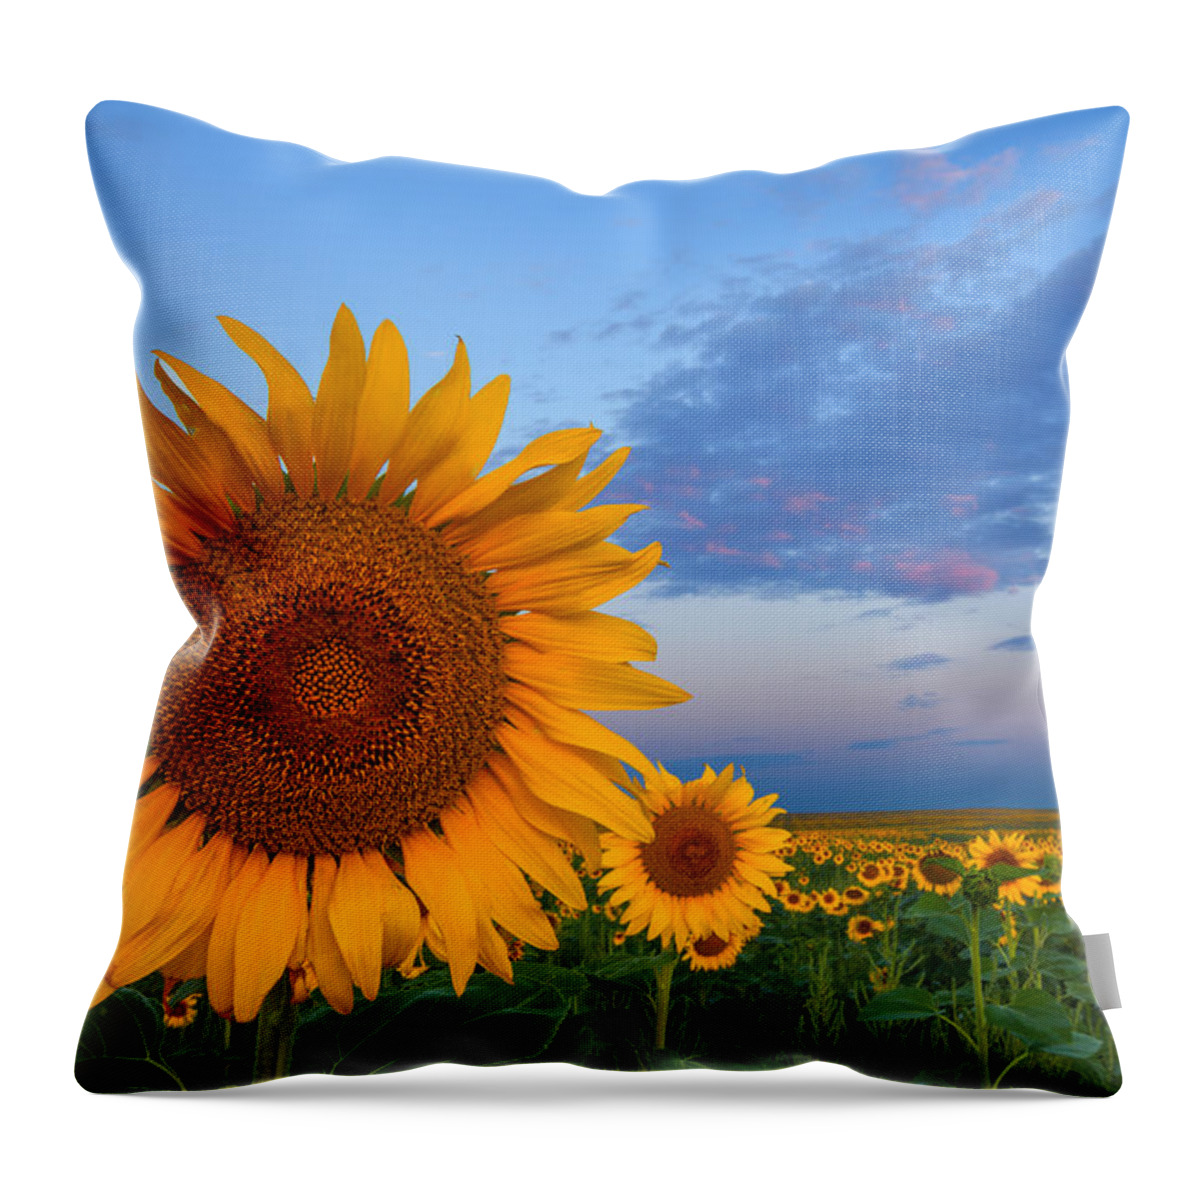 Sunflowers Throw Pillow featuring the photograph Sunny Side Up by Darren White